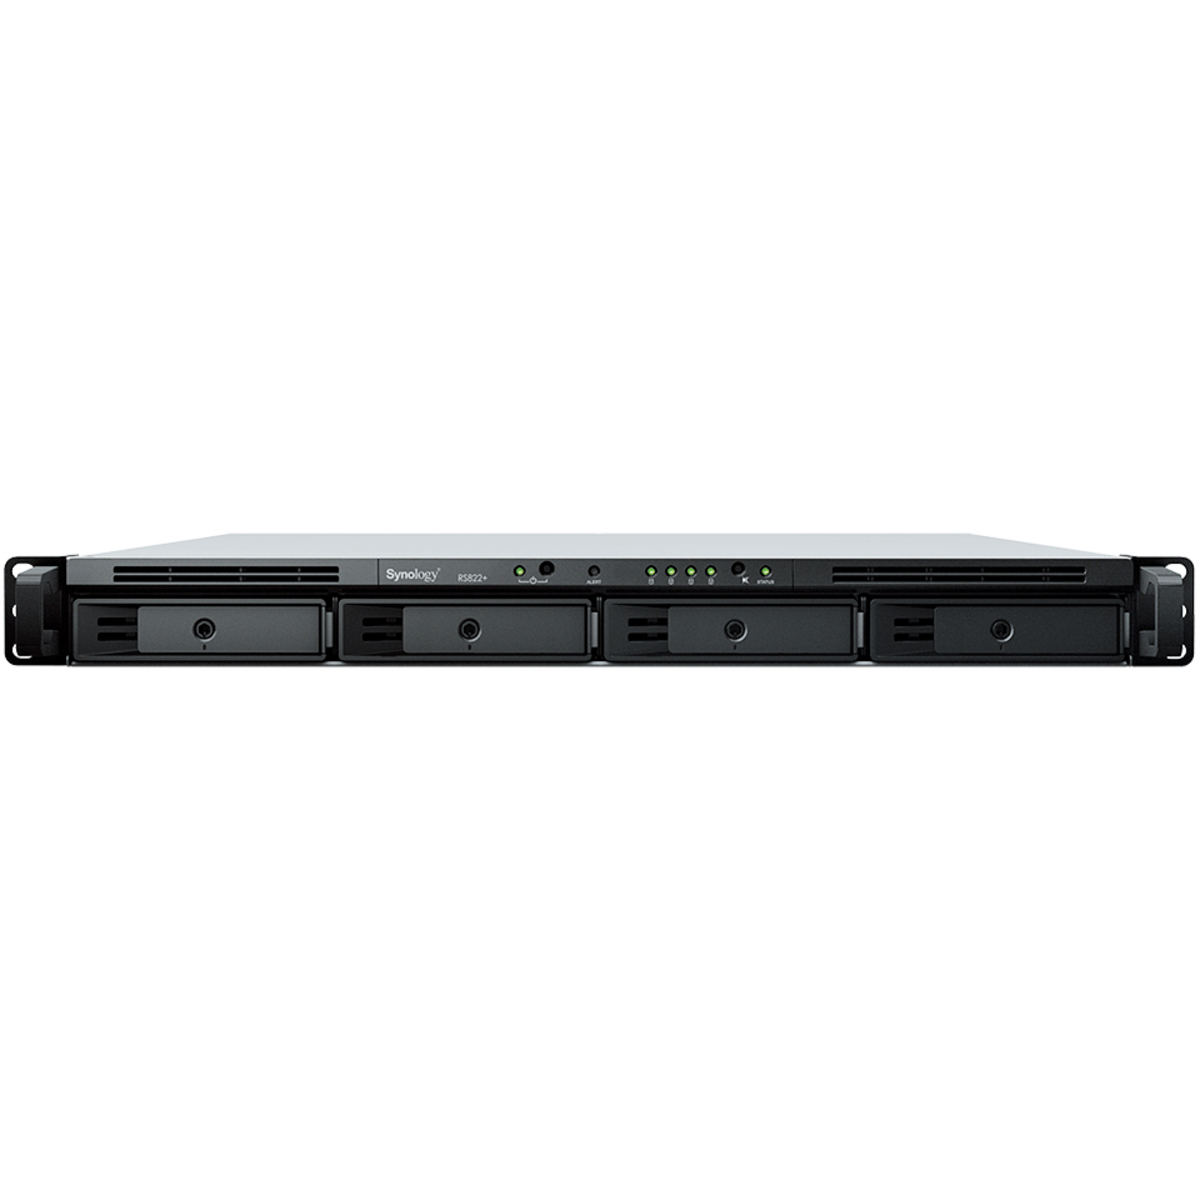 Synology RackStation RS822+ 16tb 4-Bay RackMount Multimedia / Power User / Business NAS - Network Attached Storage Device 4x4tb Samsung 870 EVO MZ-77E4T0BAM 2.5 560/530MB/s SATA 6Gb/s SSD CONSUMER Class Drives Installed - Burn-In Tested - ON SALE RackStation RS822+